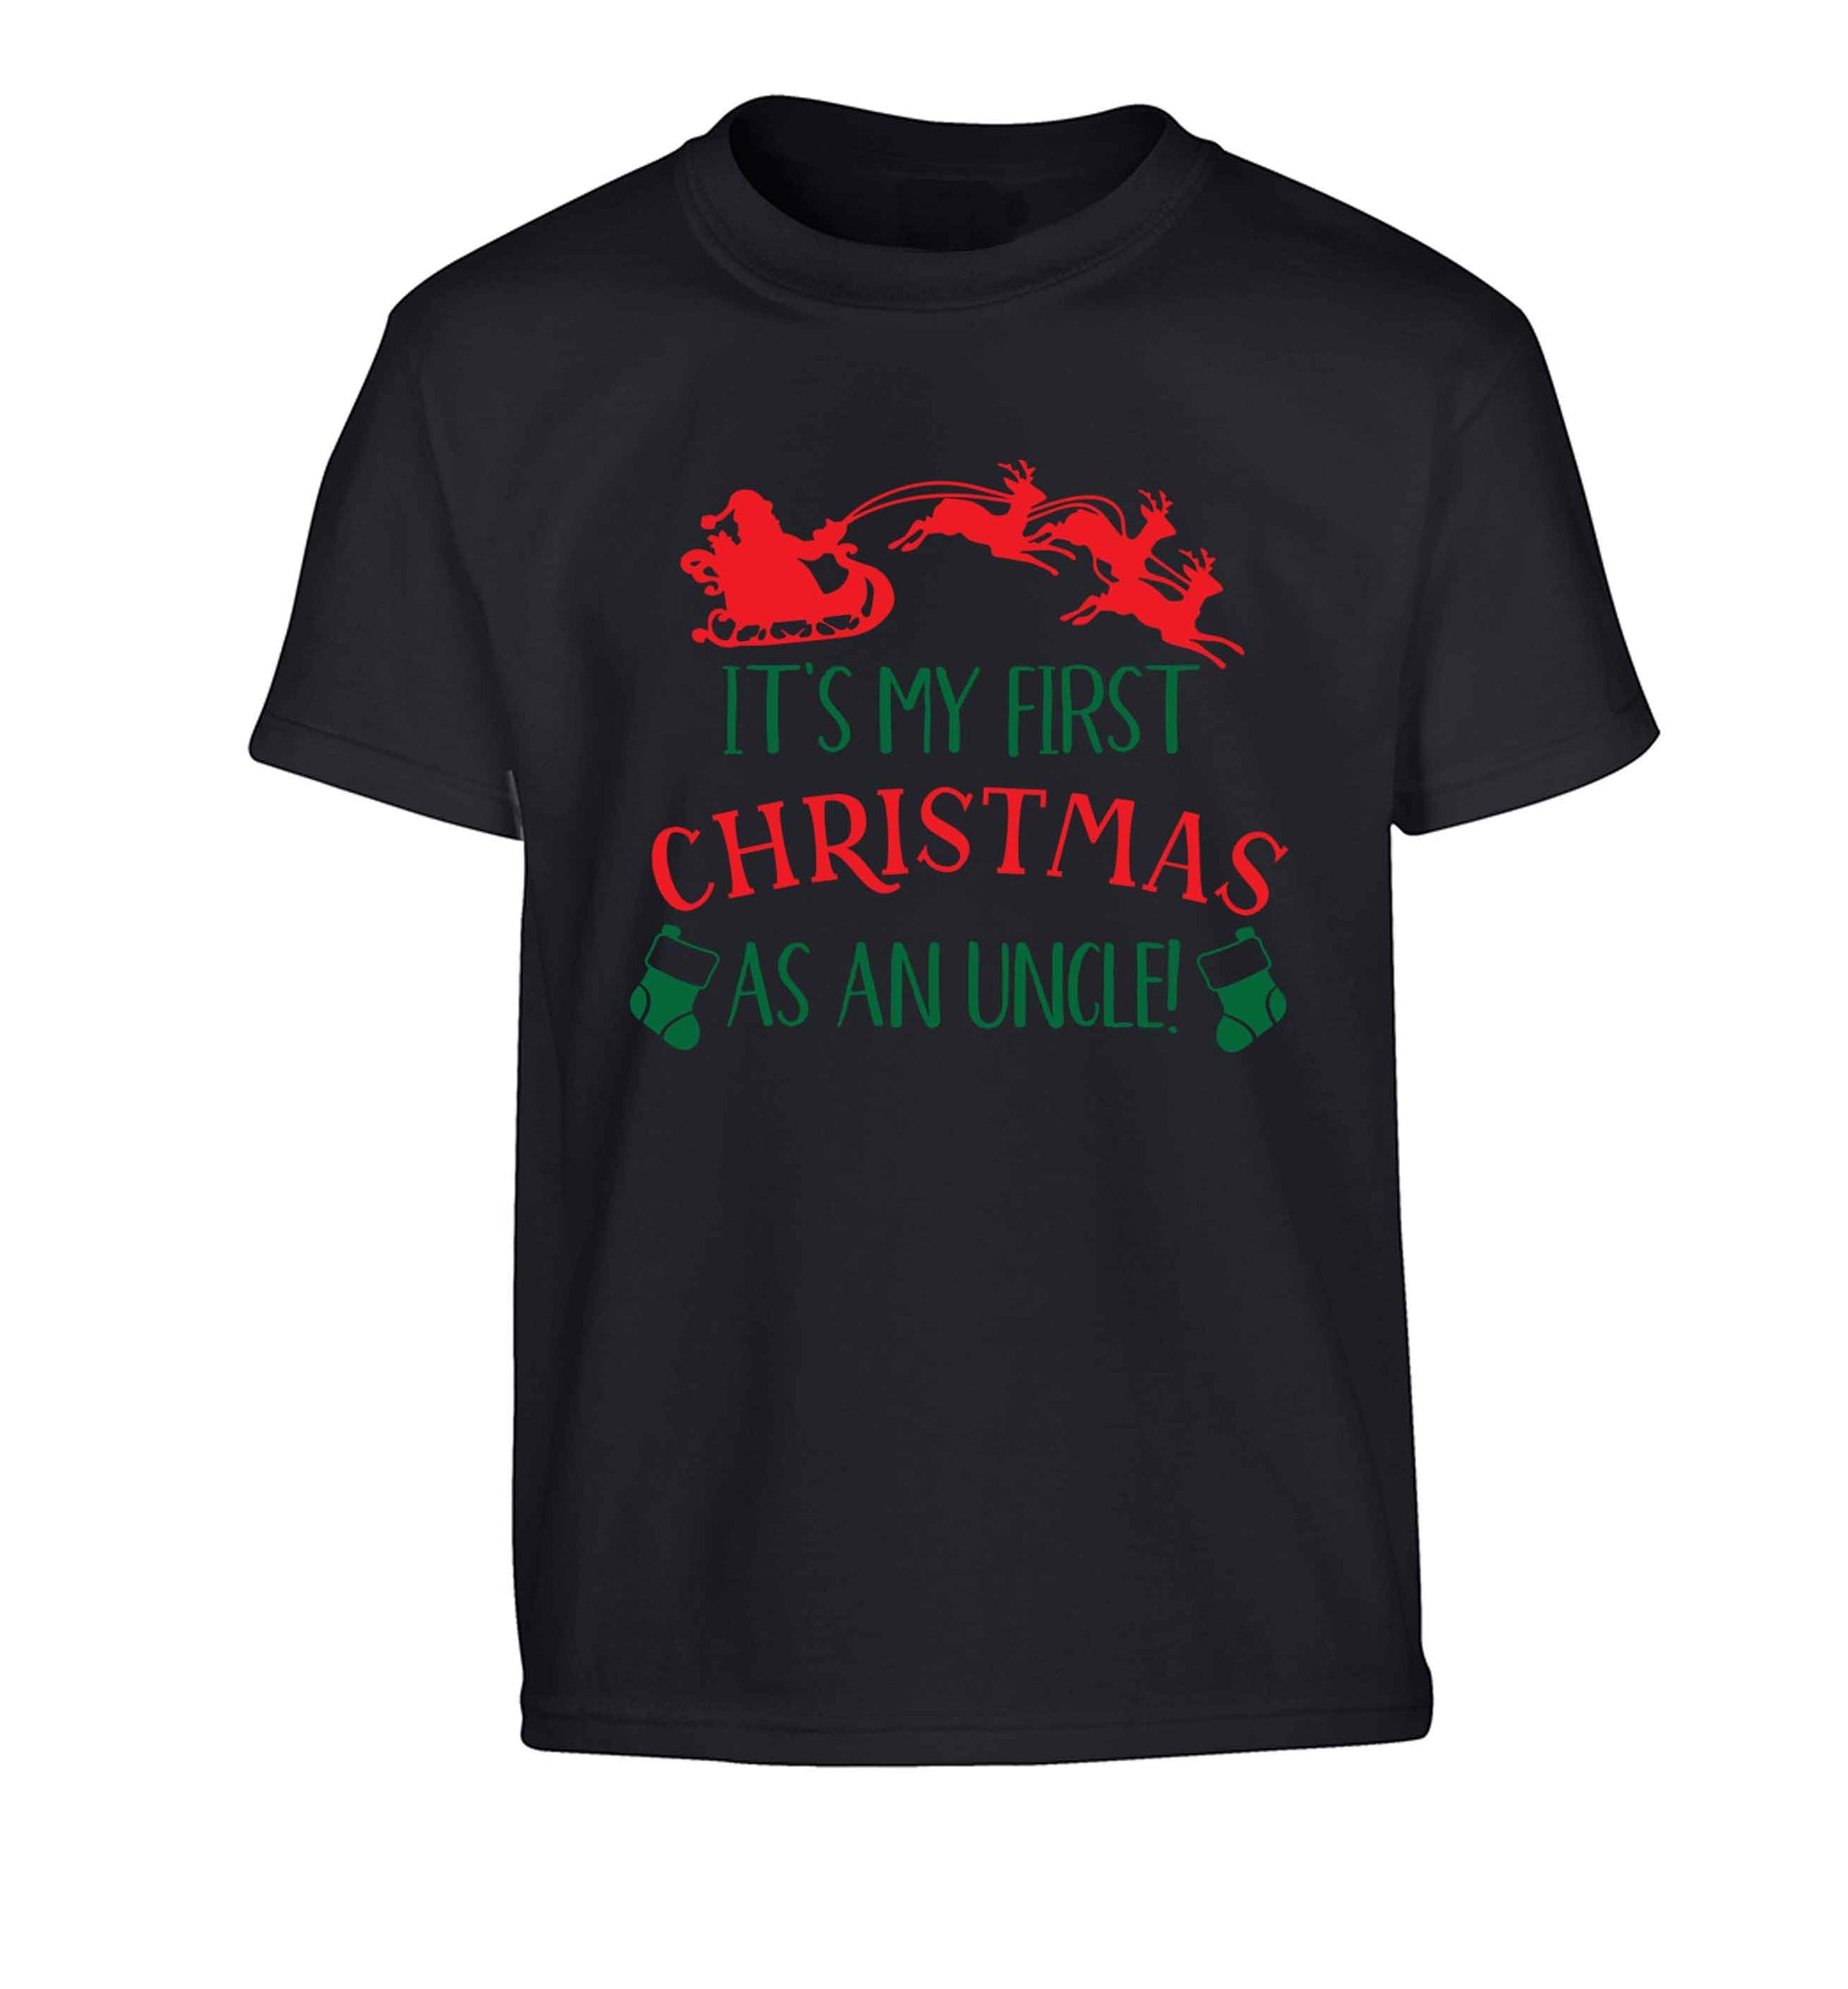 It's my first Christmas as an uncle! Children's black Tshirt 12-13 Years